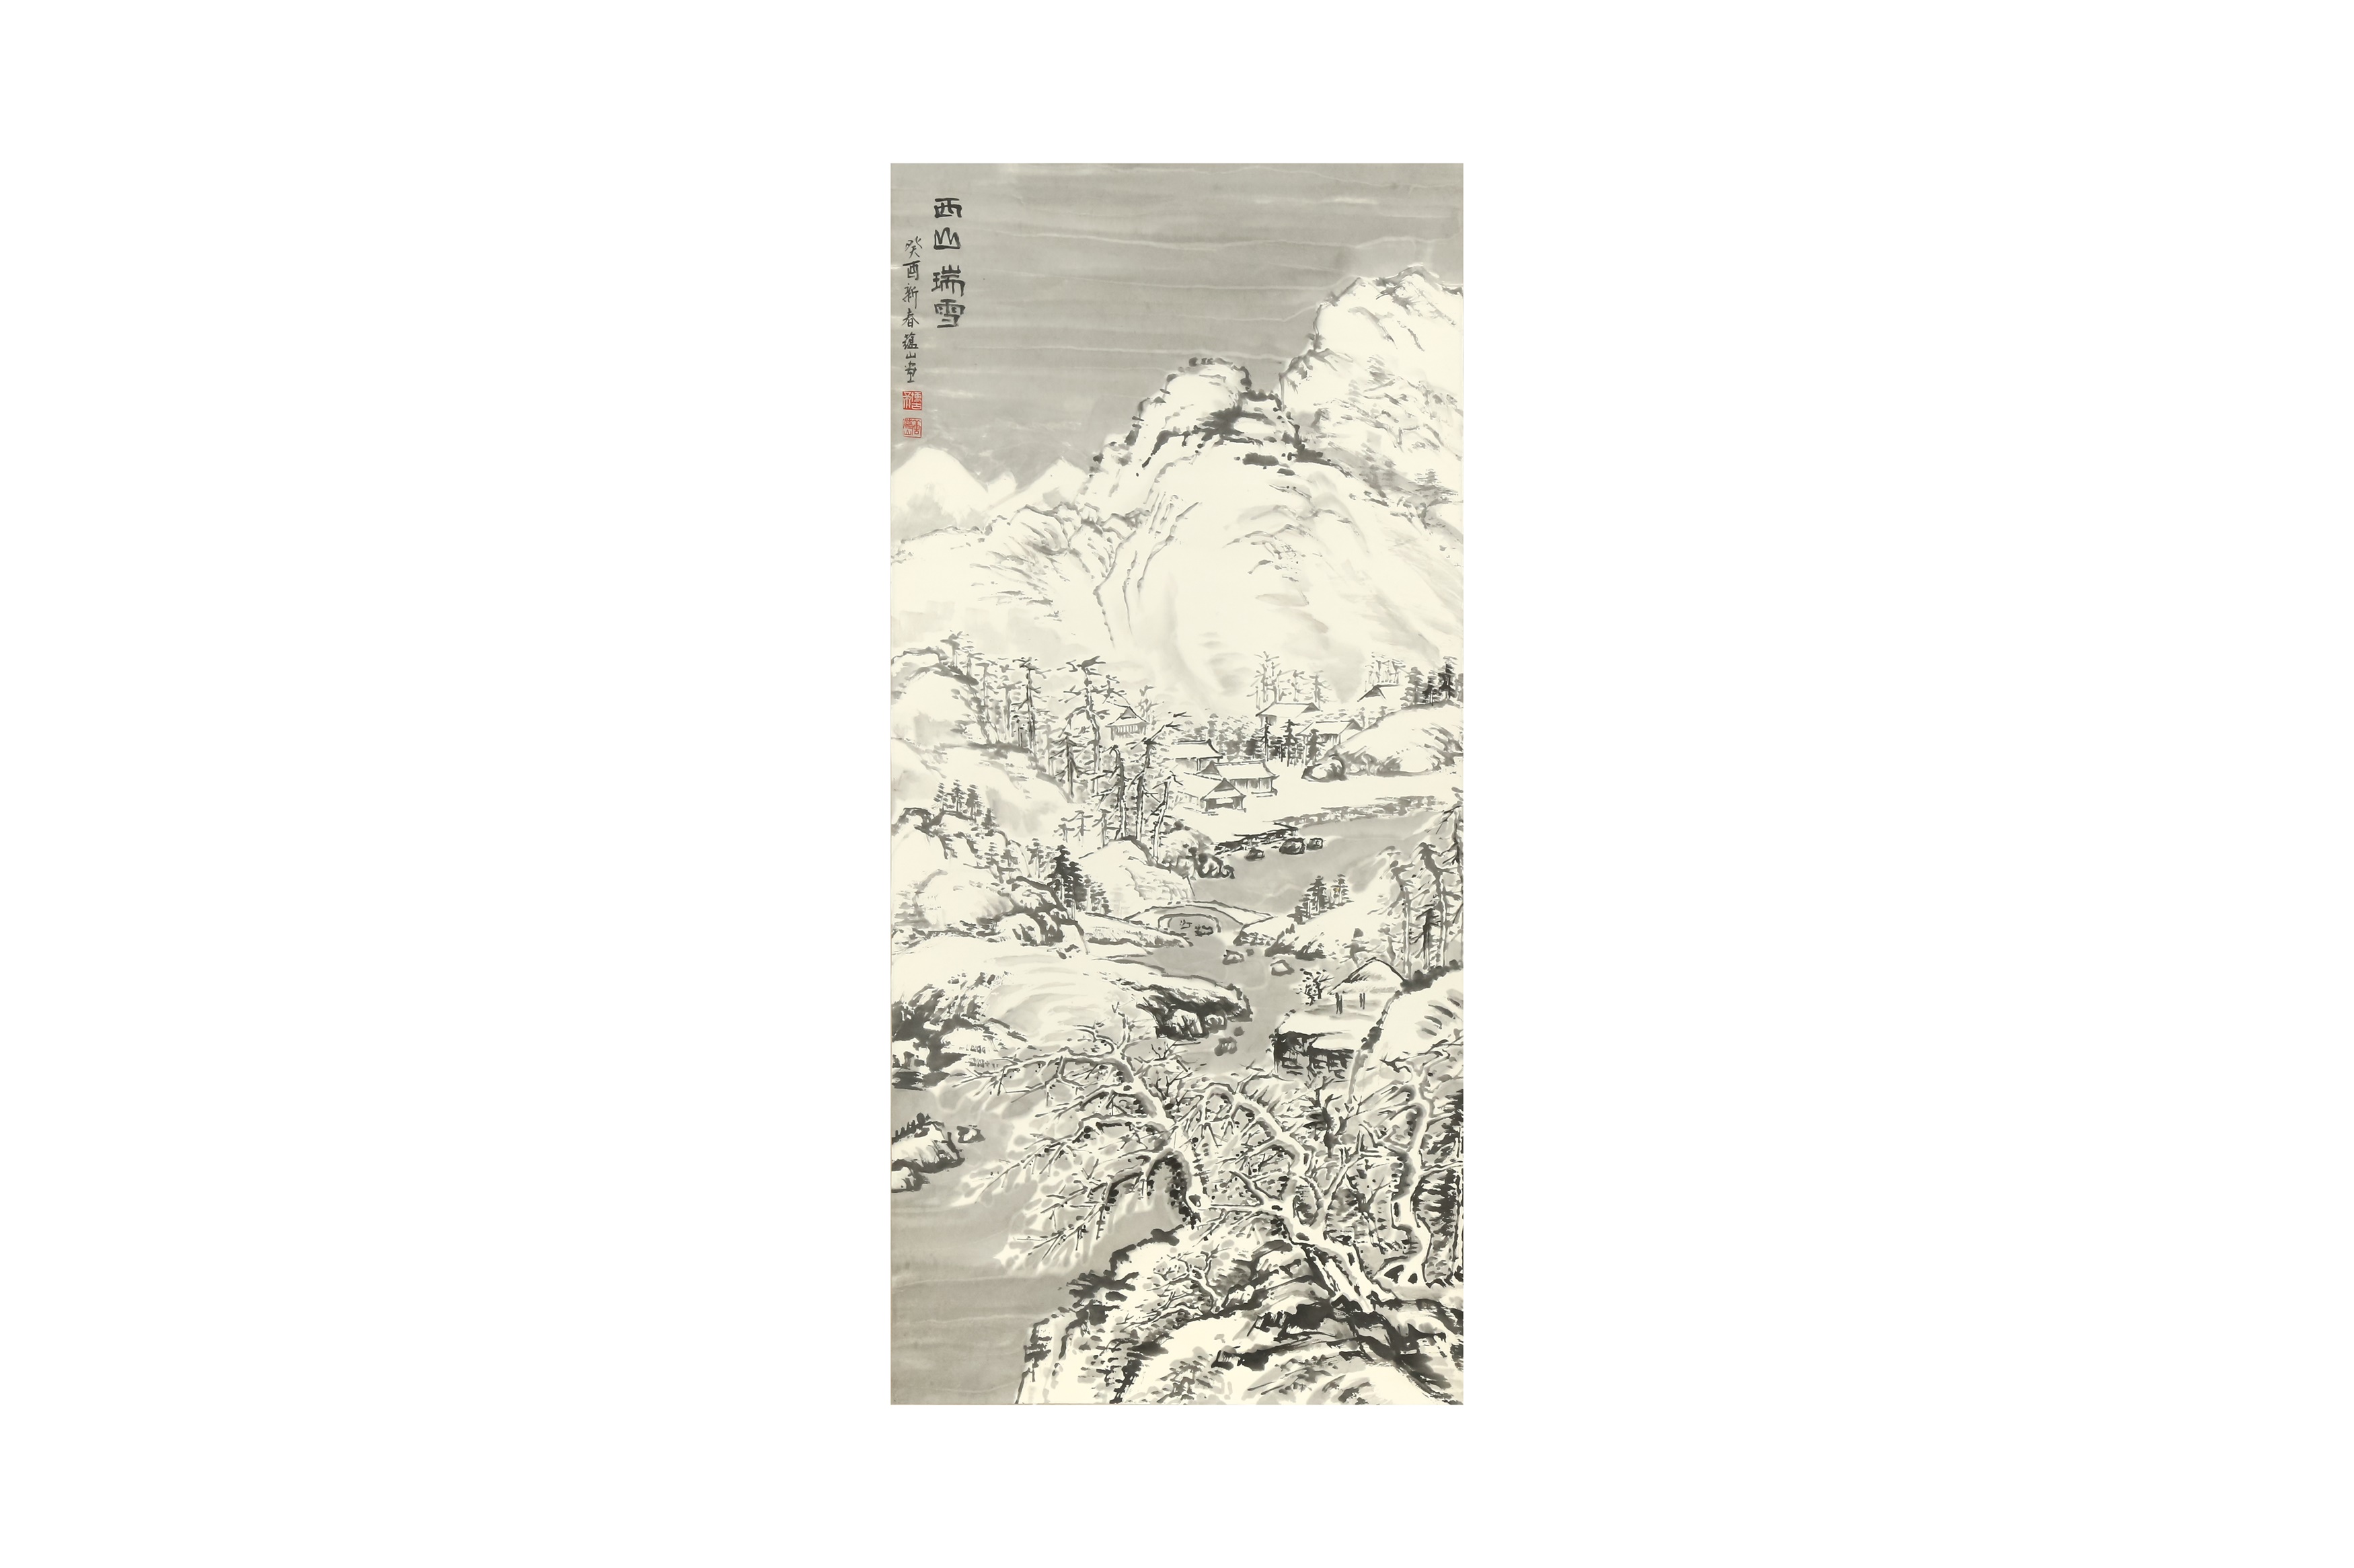 THREE CHINESE HANGING SCROLL PAINTINGS 二十世紀 掛軸三幅 - Image 4 of 8